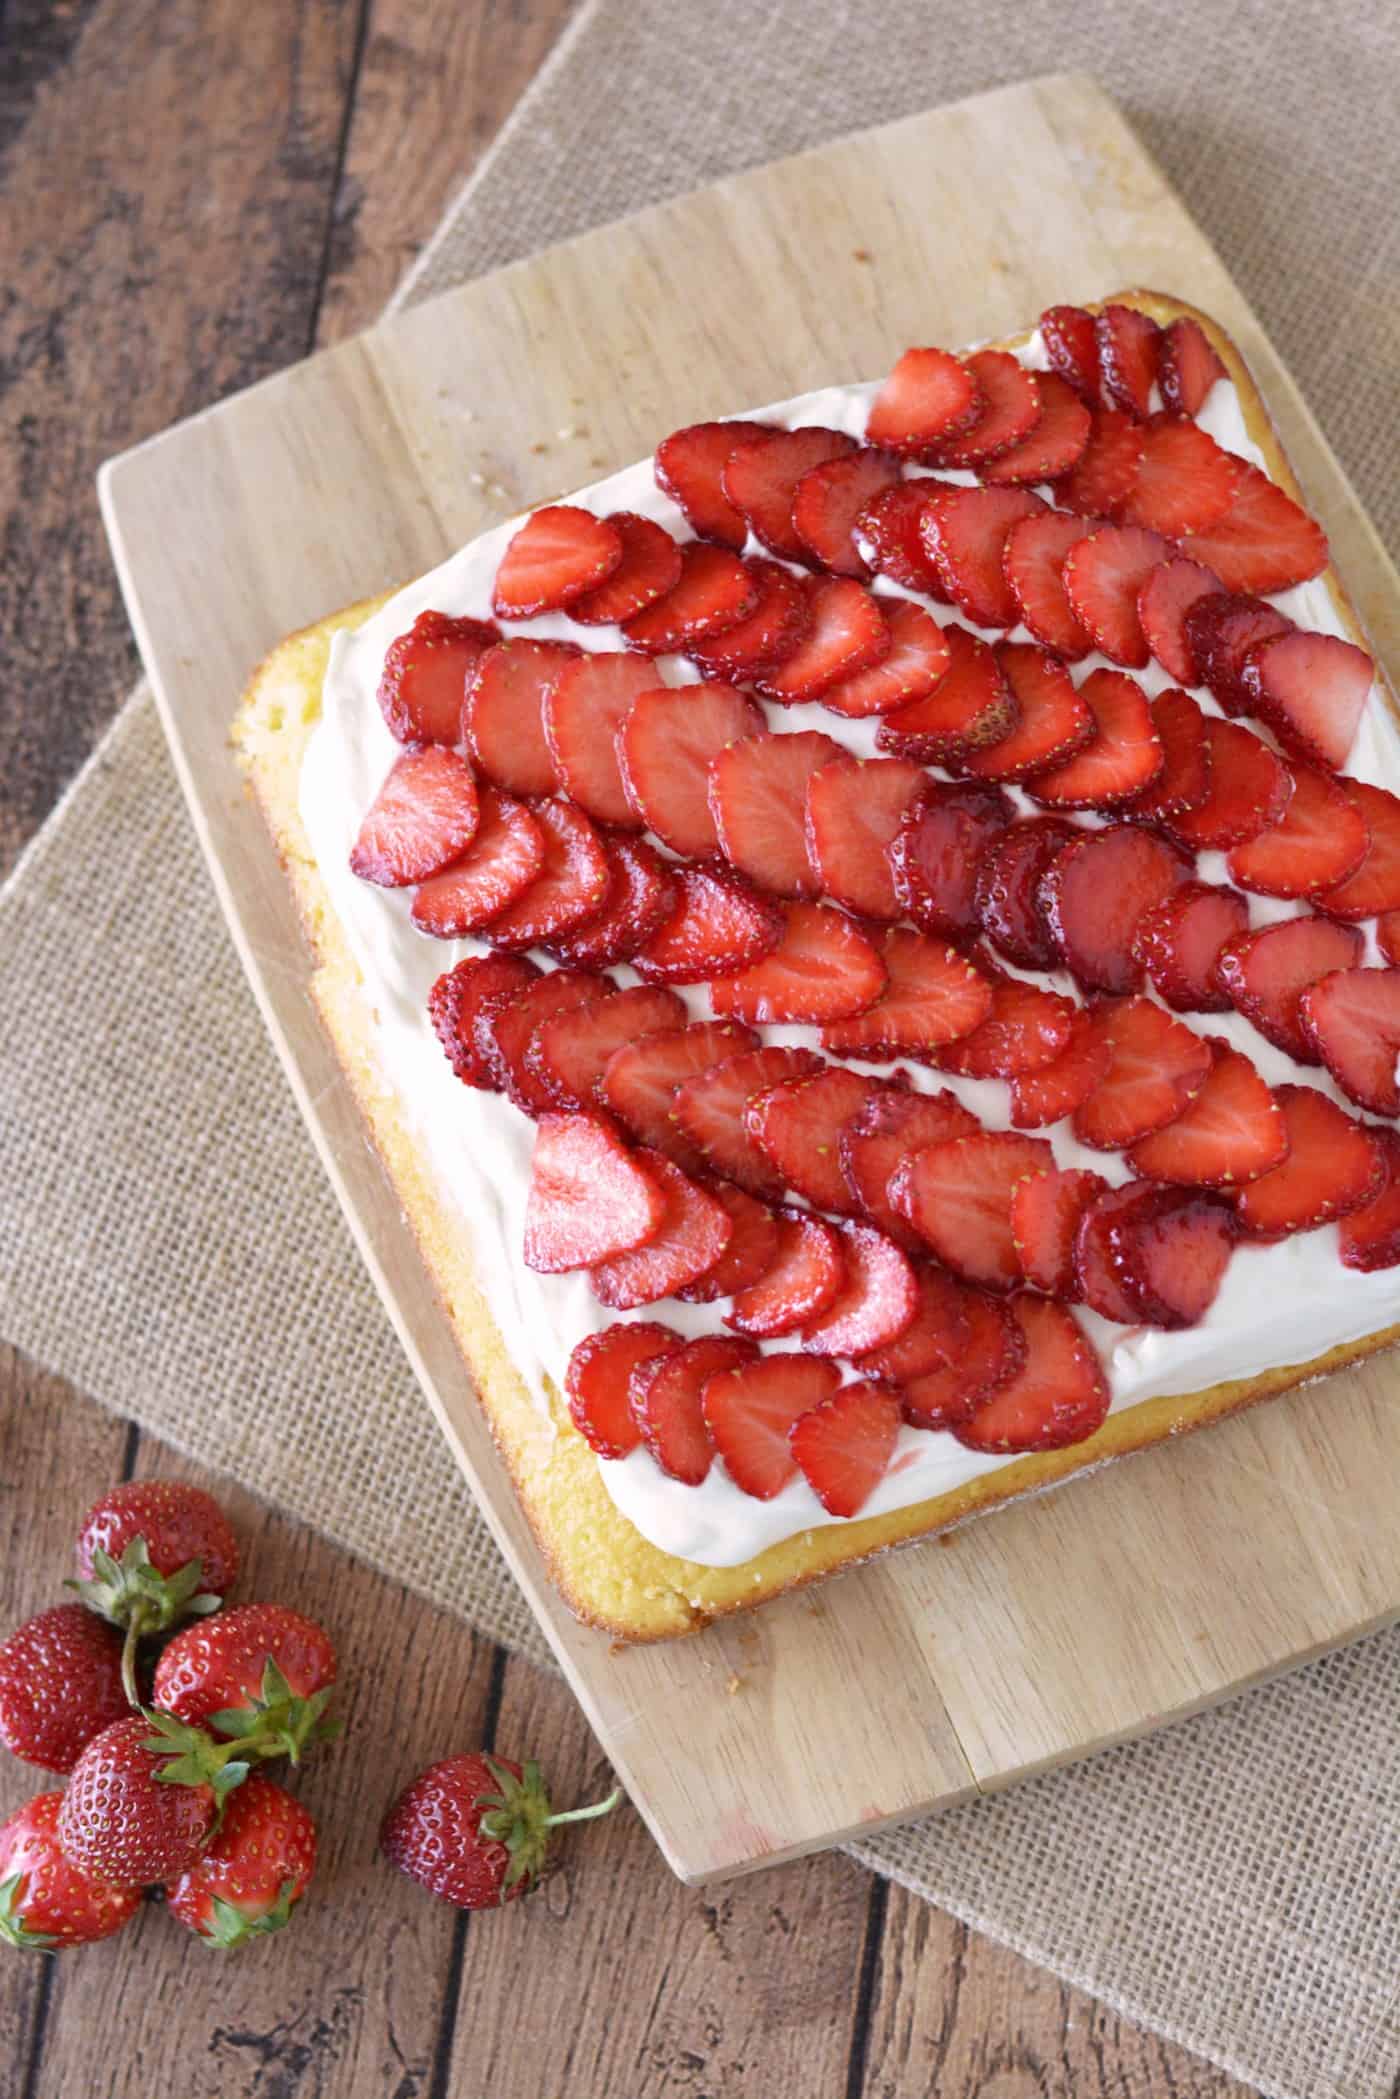 This strawberry cake recipe is a showstopper! It's moist and delicious - and not too sweet. Make this pretty, tasty dessert quickly and easily.